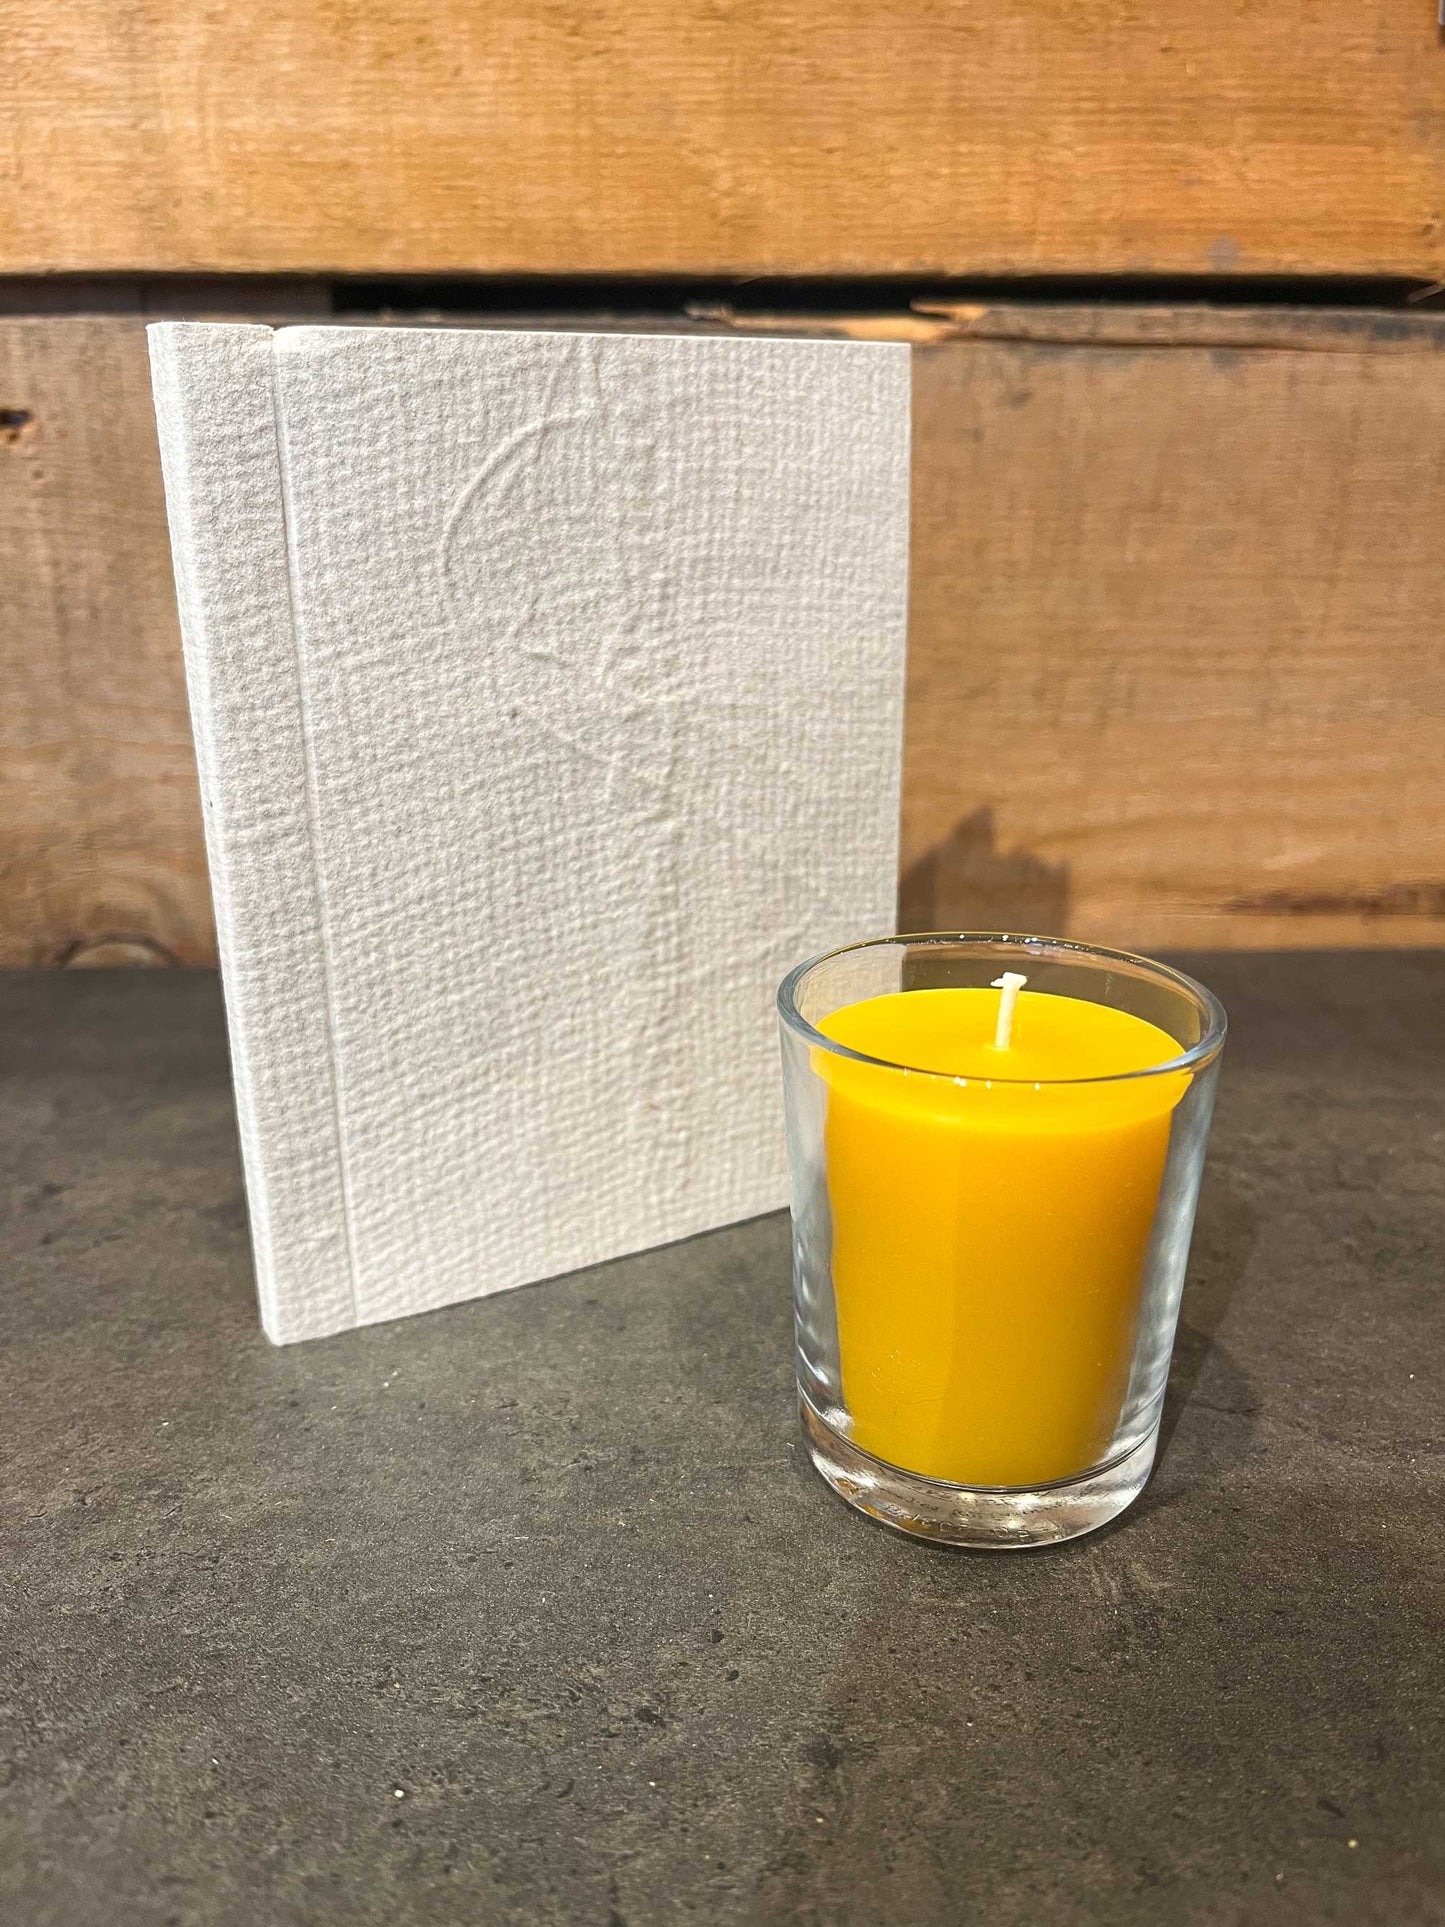 Handmade beeswax votive candle in glass cup next to beige eco-friendly notebook